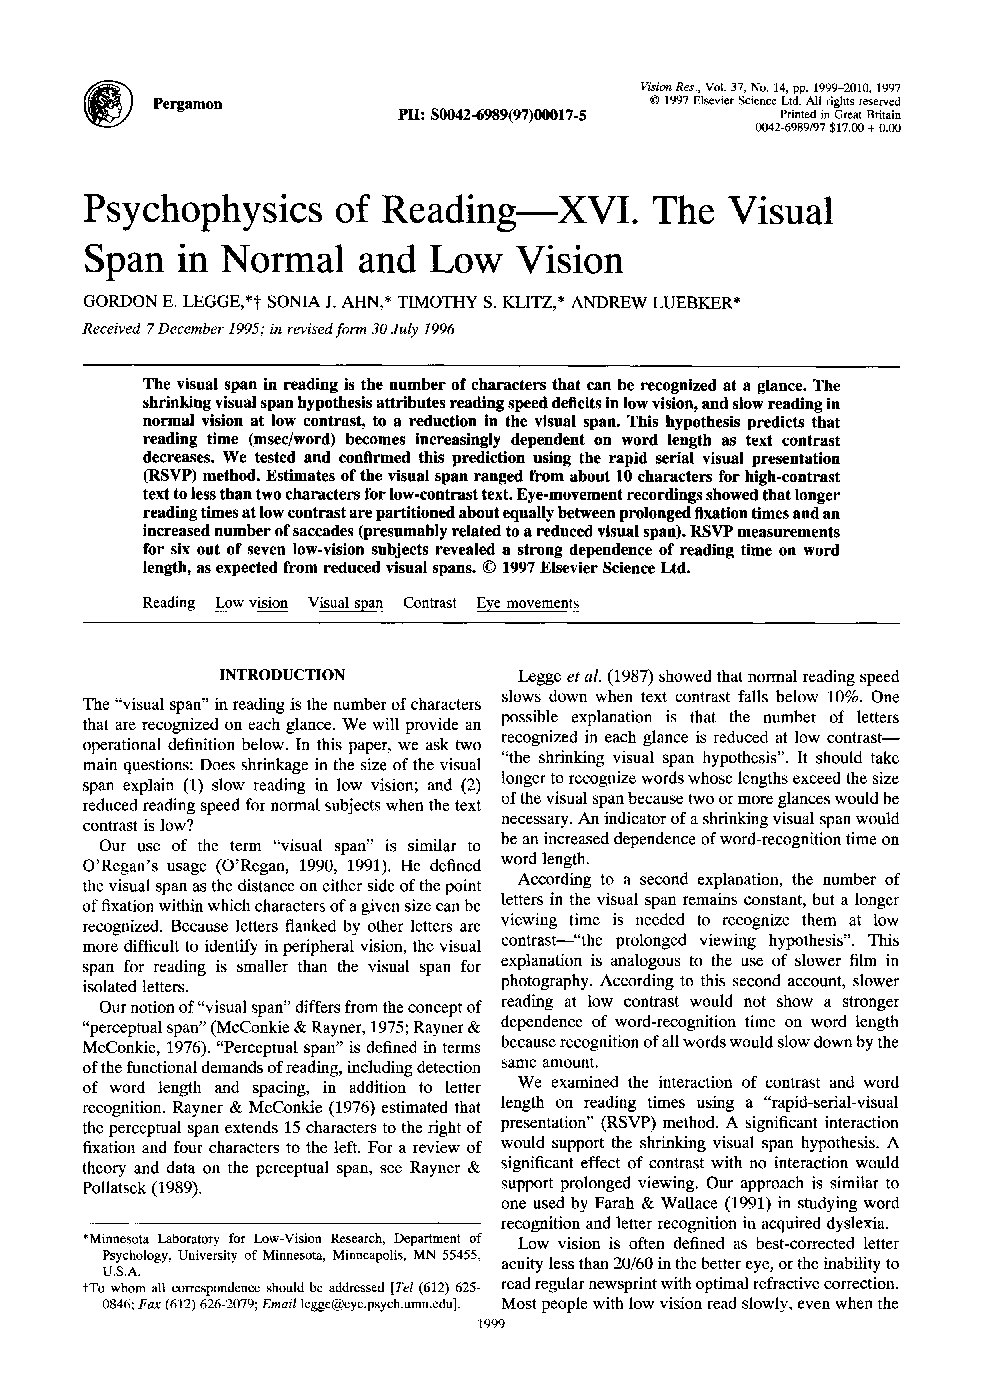 Psychophysics of reading—XVI. The visual span in normal and low vision